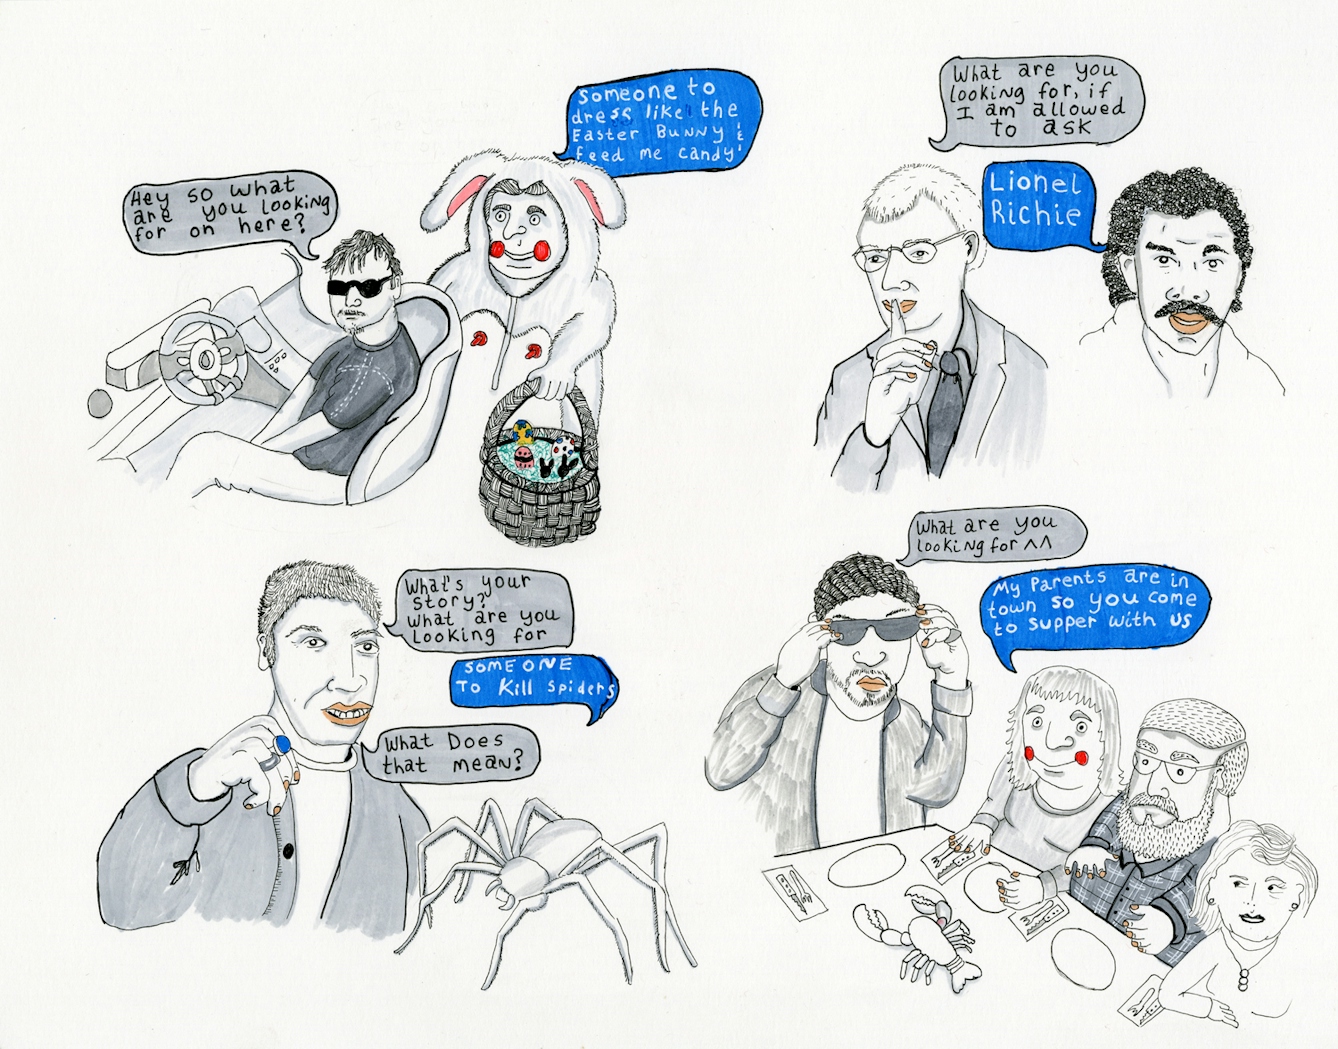 Pen and ink sketches of people, with their Tinder comments handwritten inside speech bubbles.